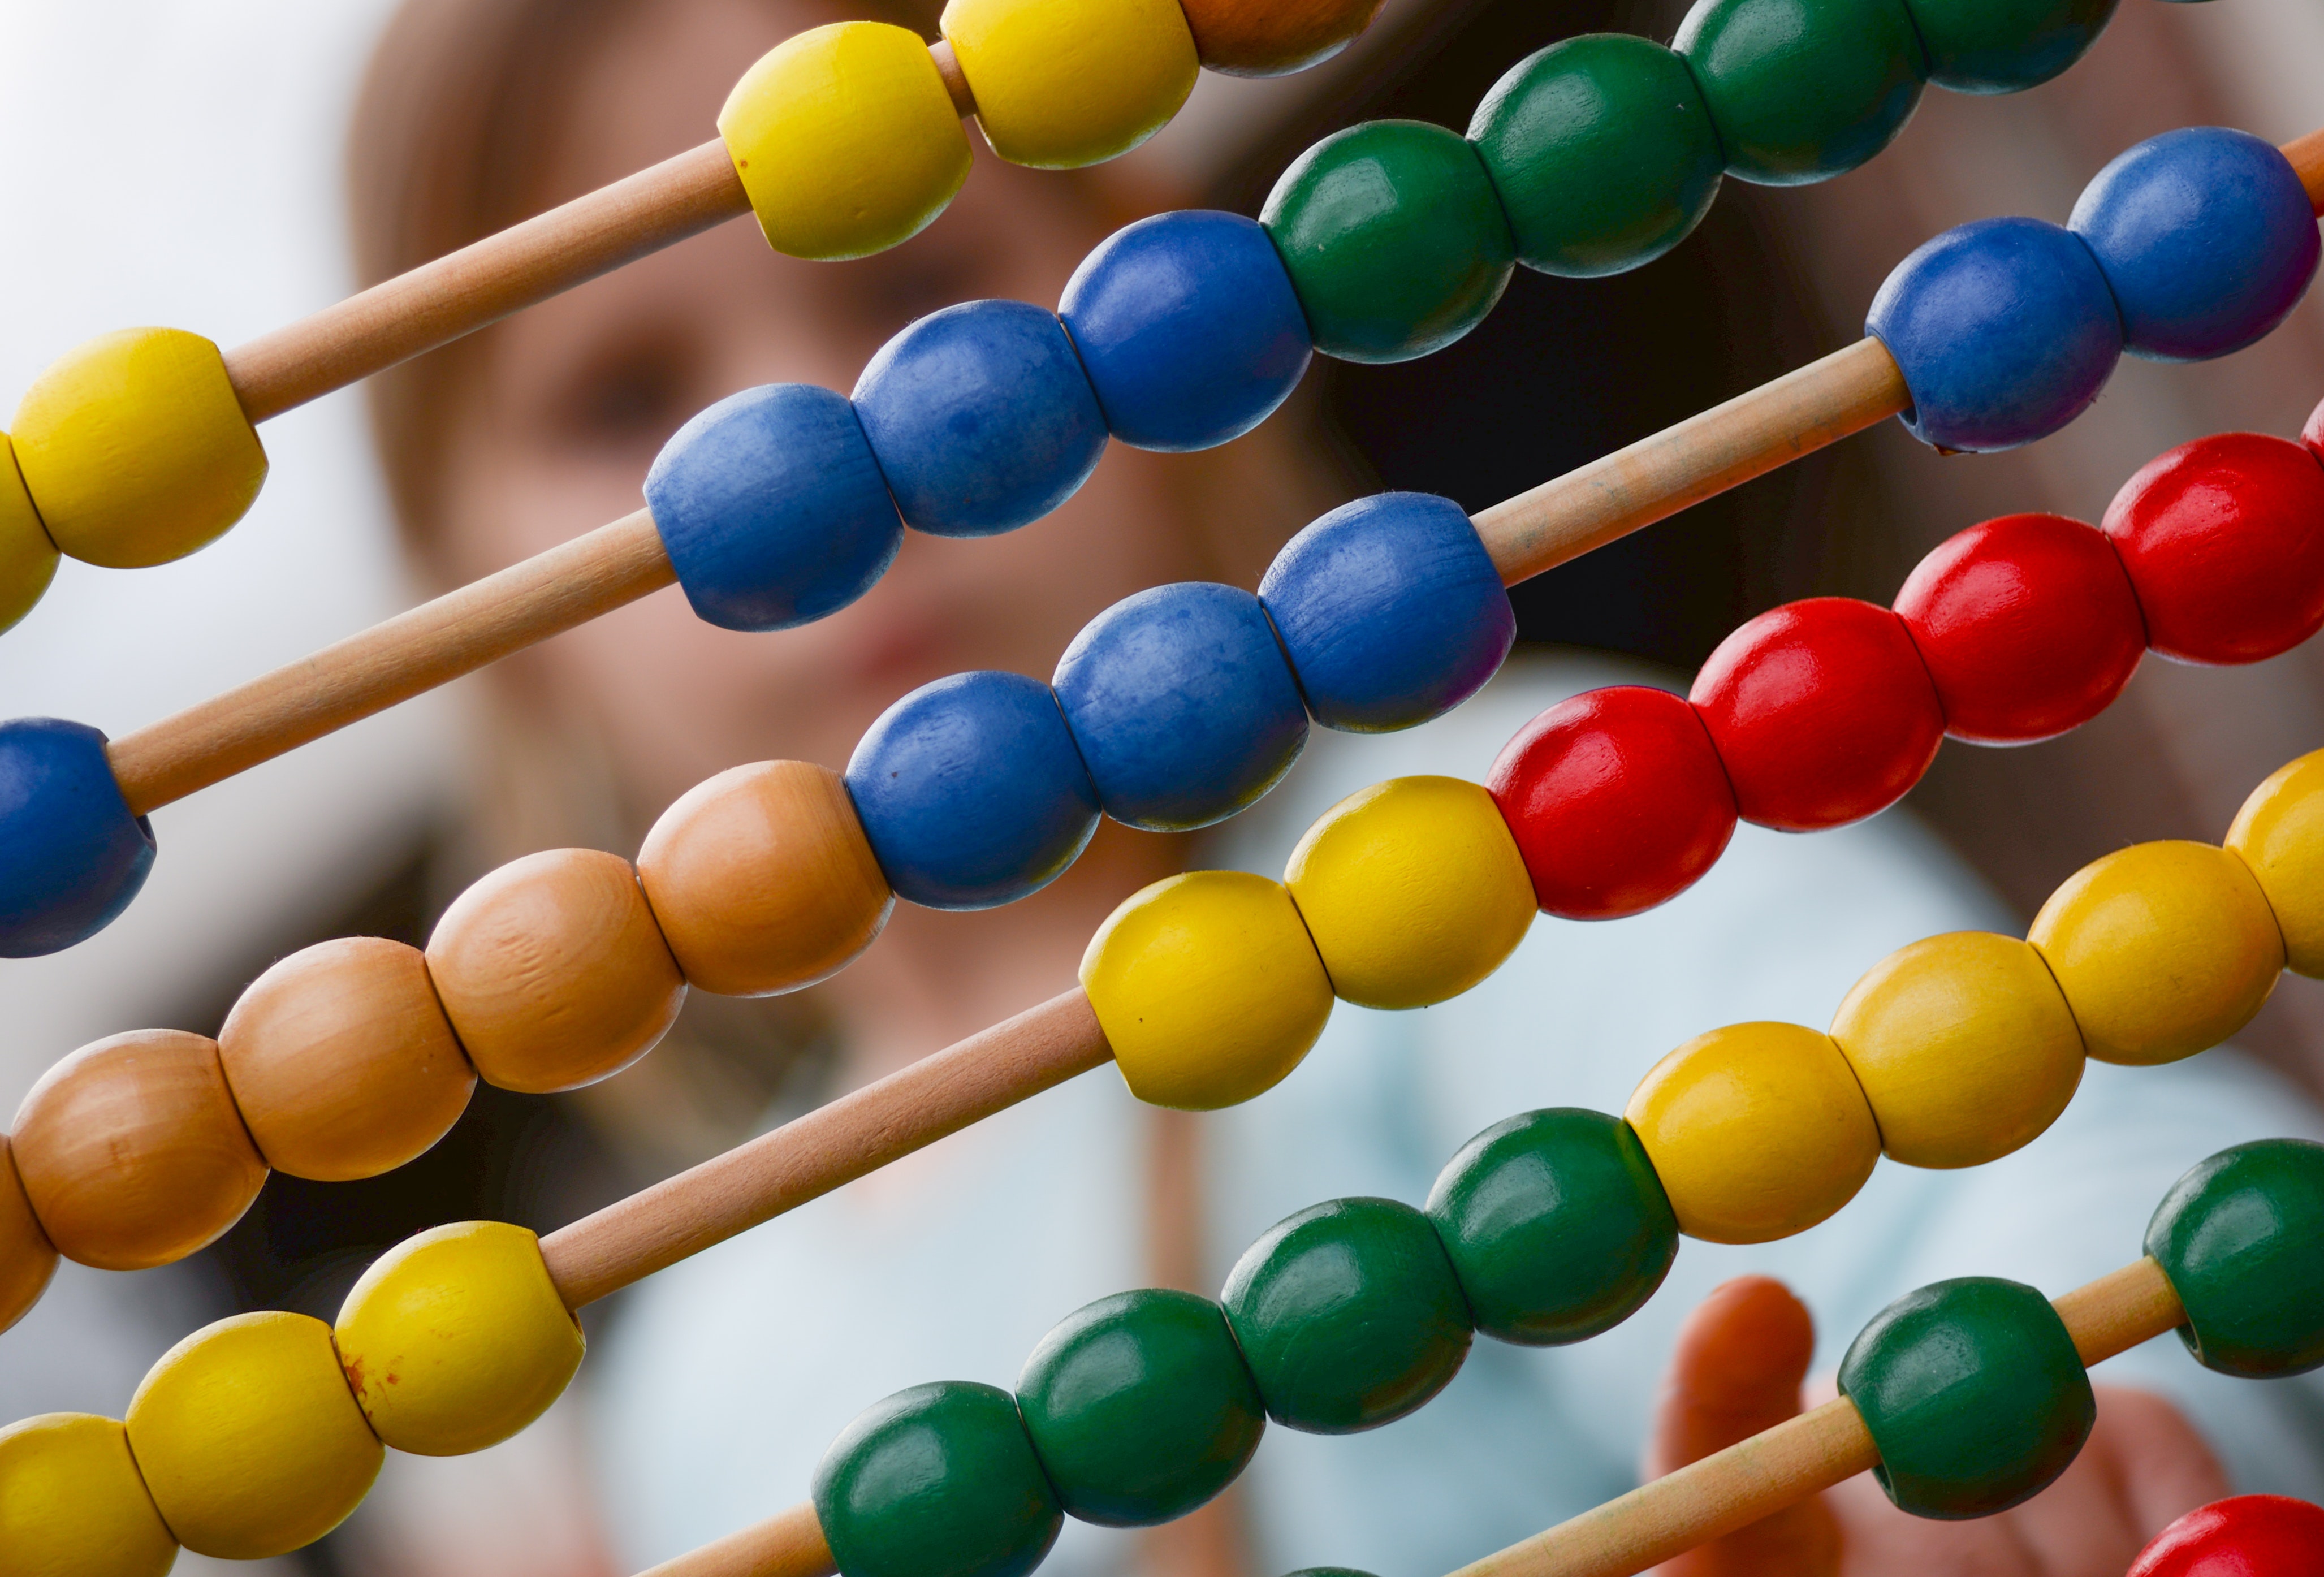 multicolored-abacus-photography-1019470_1.jpg